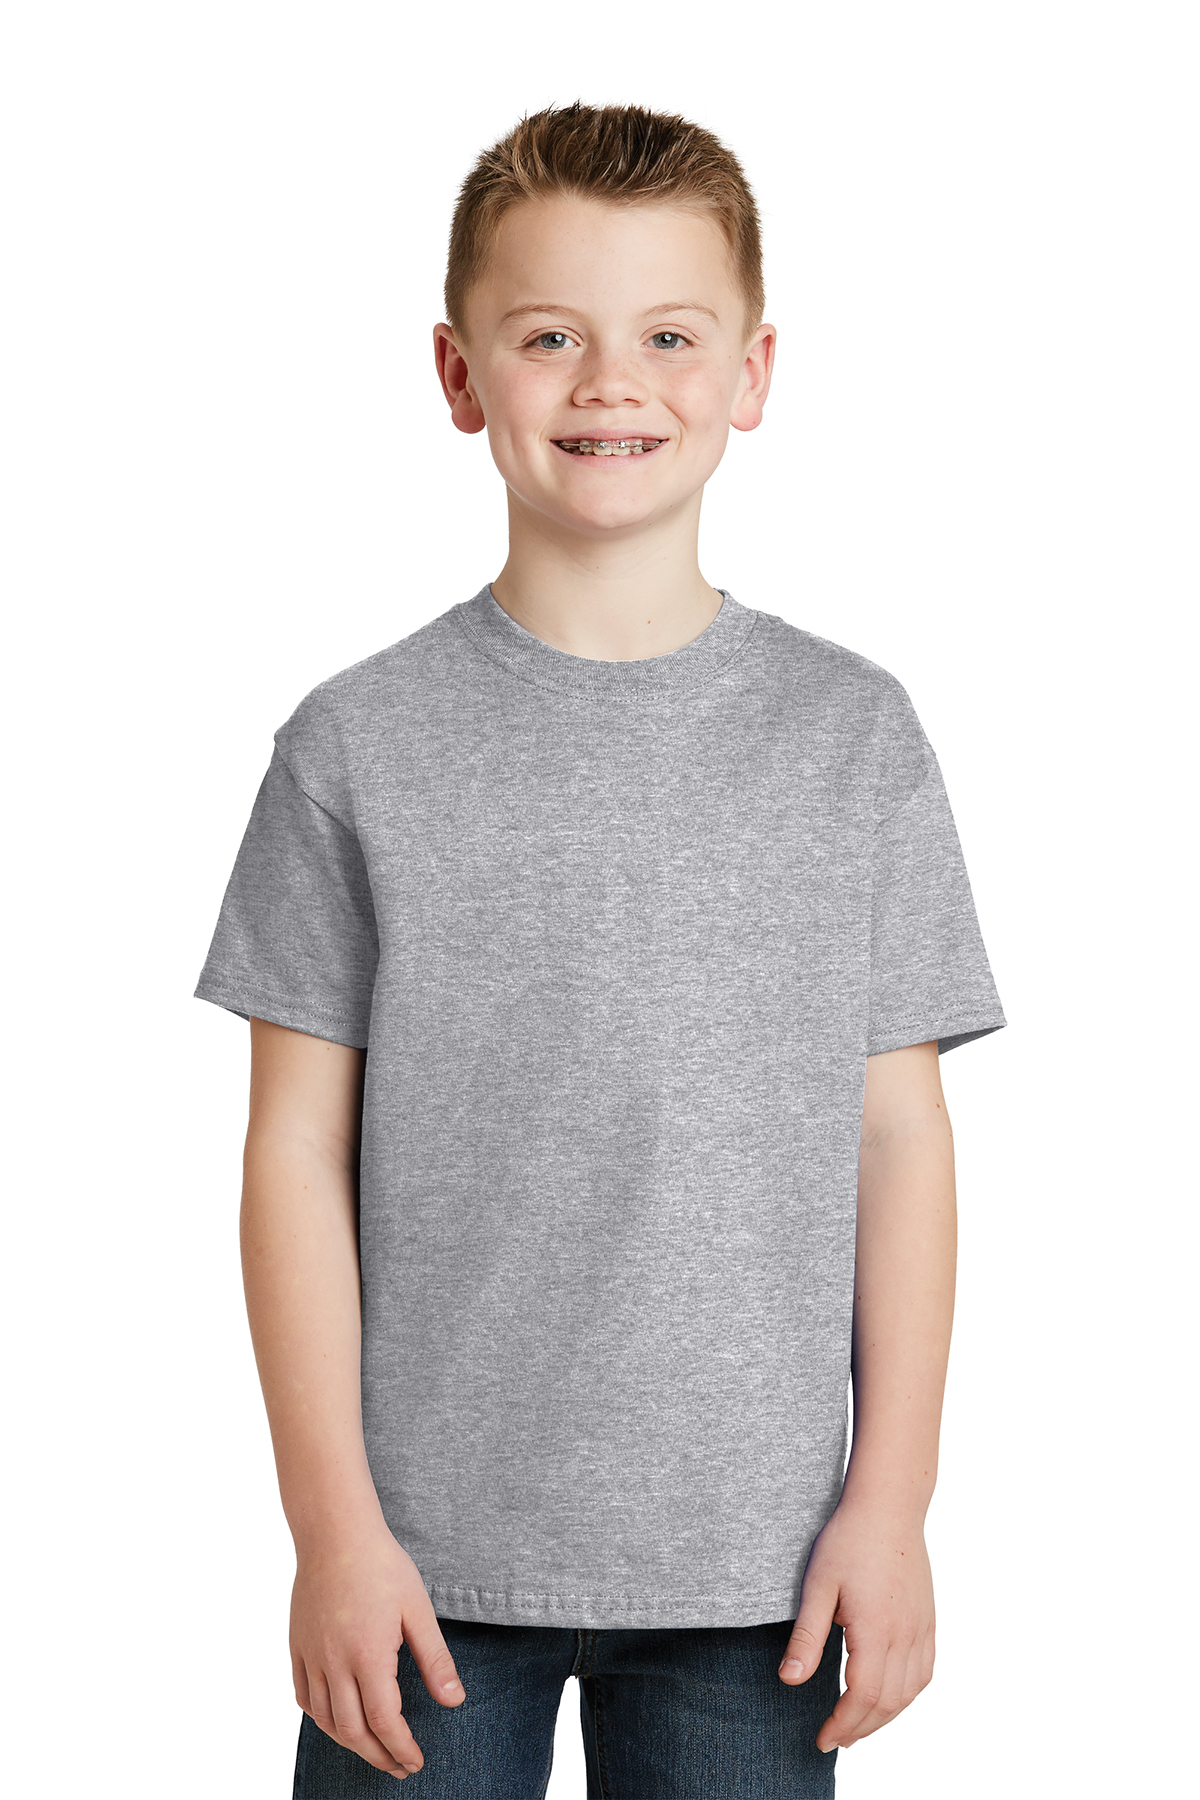 Hanes Youth Tagless 100 Cotton T Shirt 6 6 1 100 Cotton